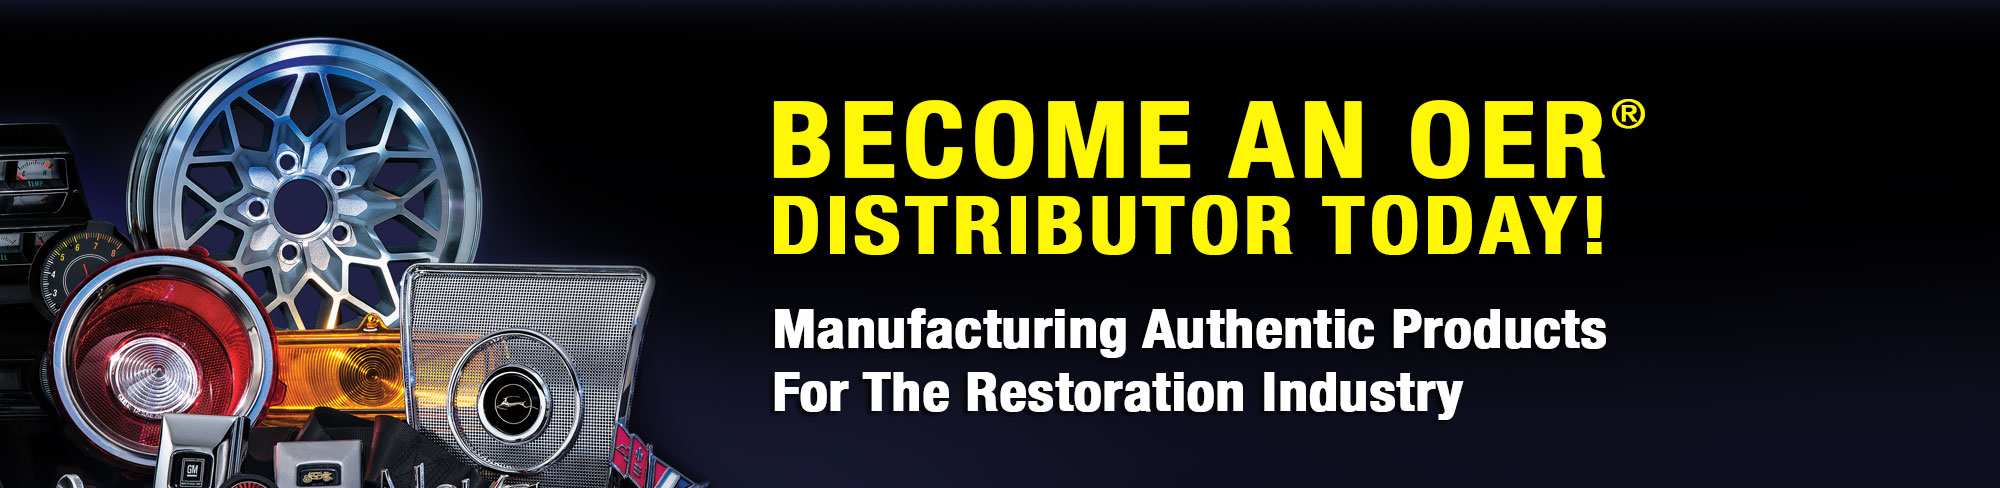 Become An OER Distributor Today!